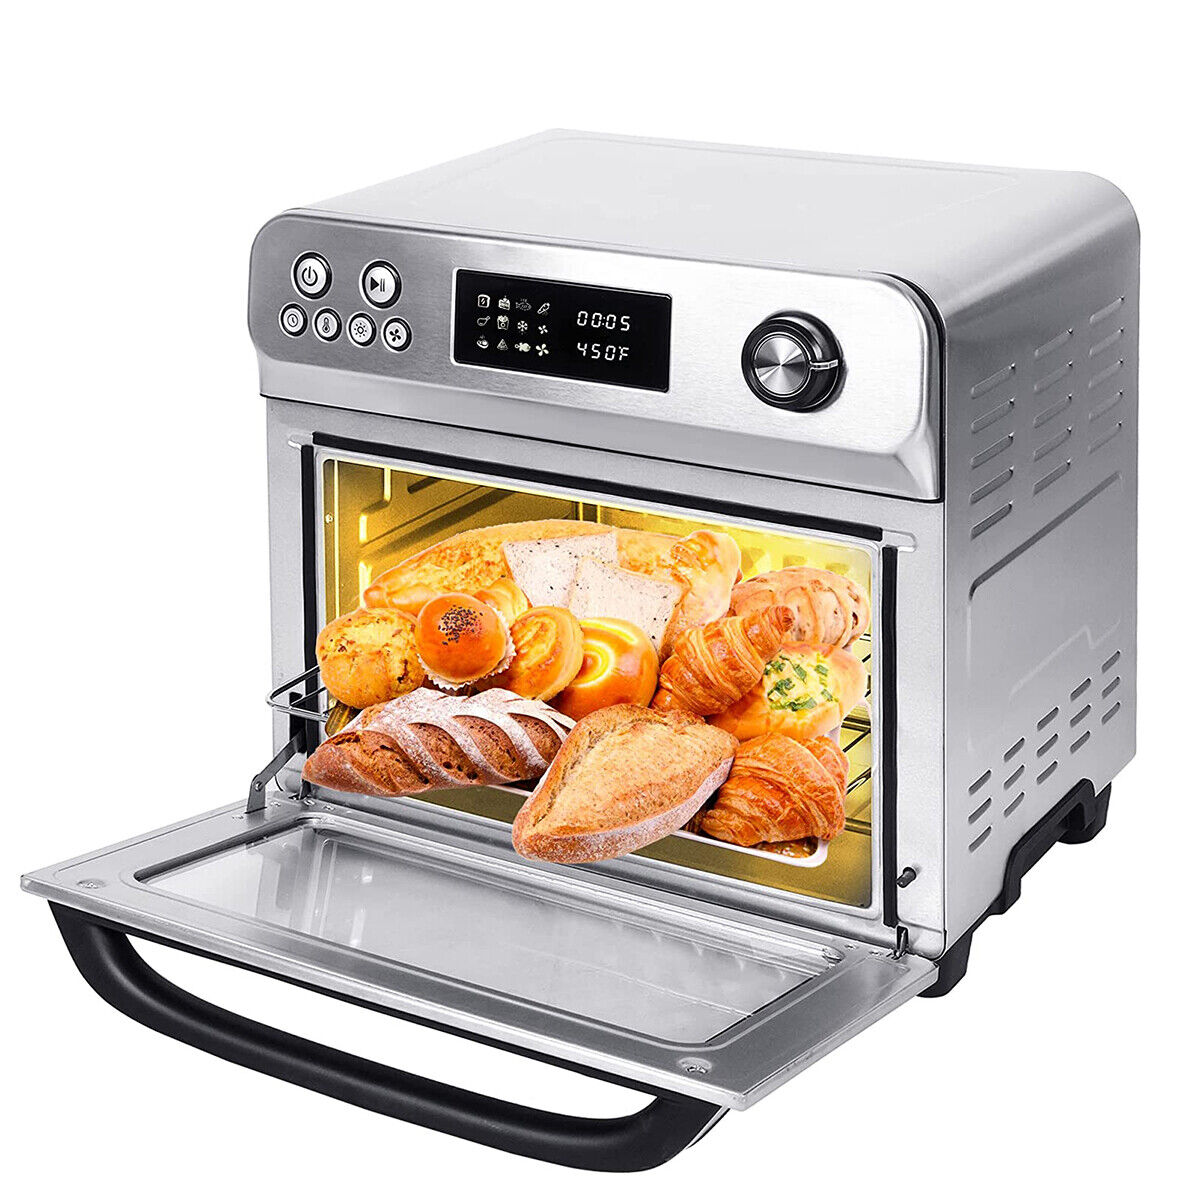 10-In-1 Air Fryer Toaster Oven, 24 QT Convection Countertop Oven Combination w/ 6 Accessories, Stainless Steel Finish, 1700W